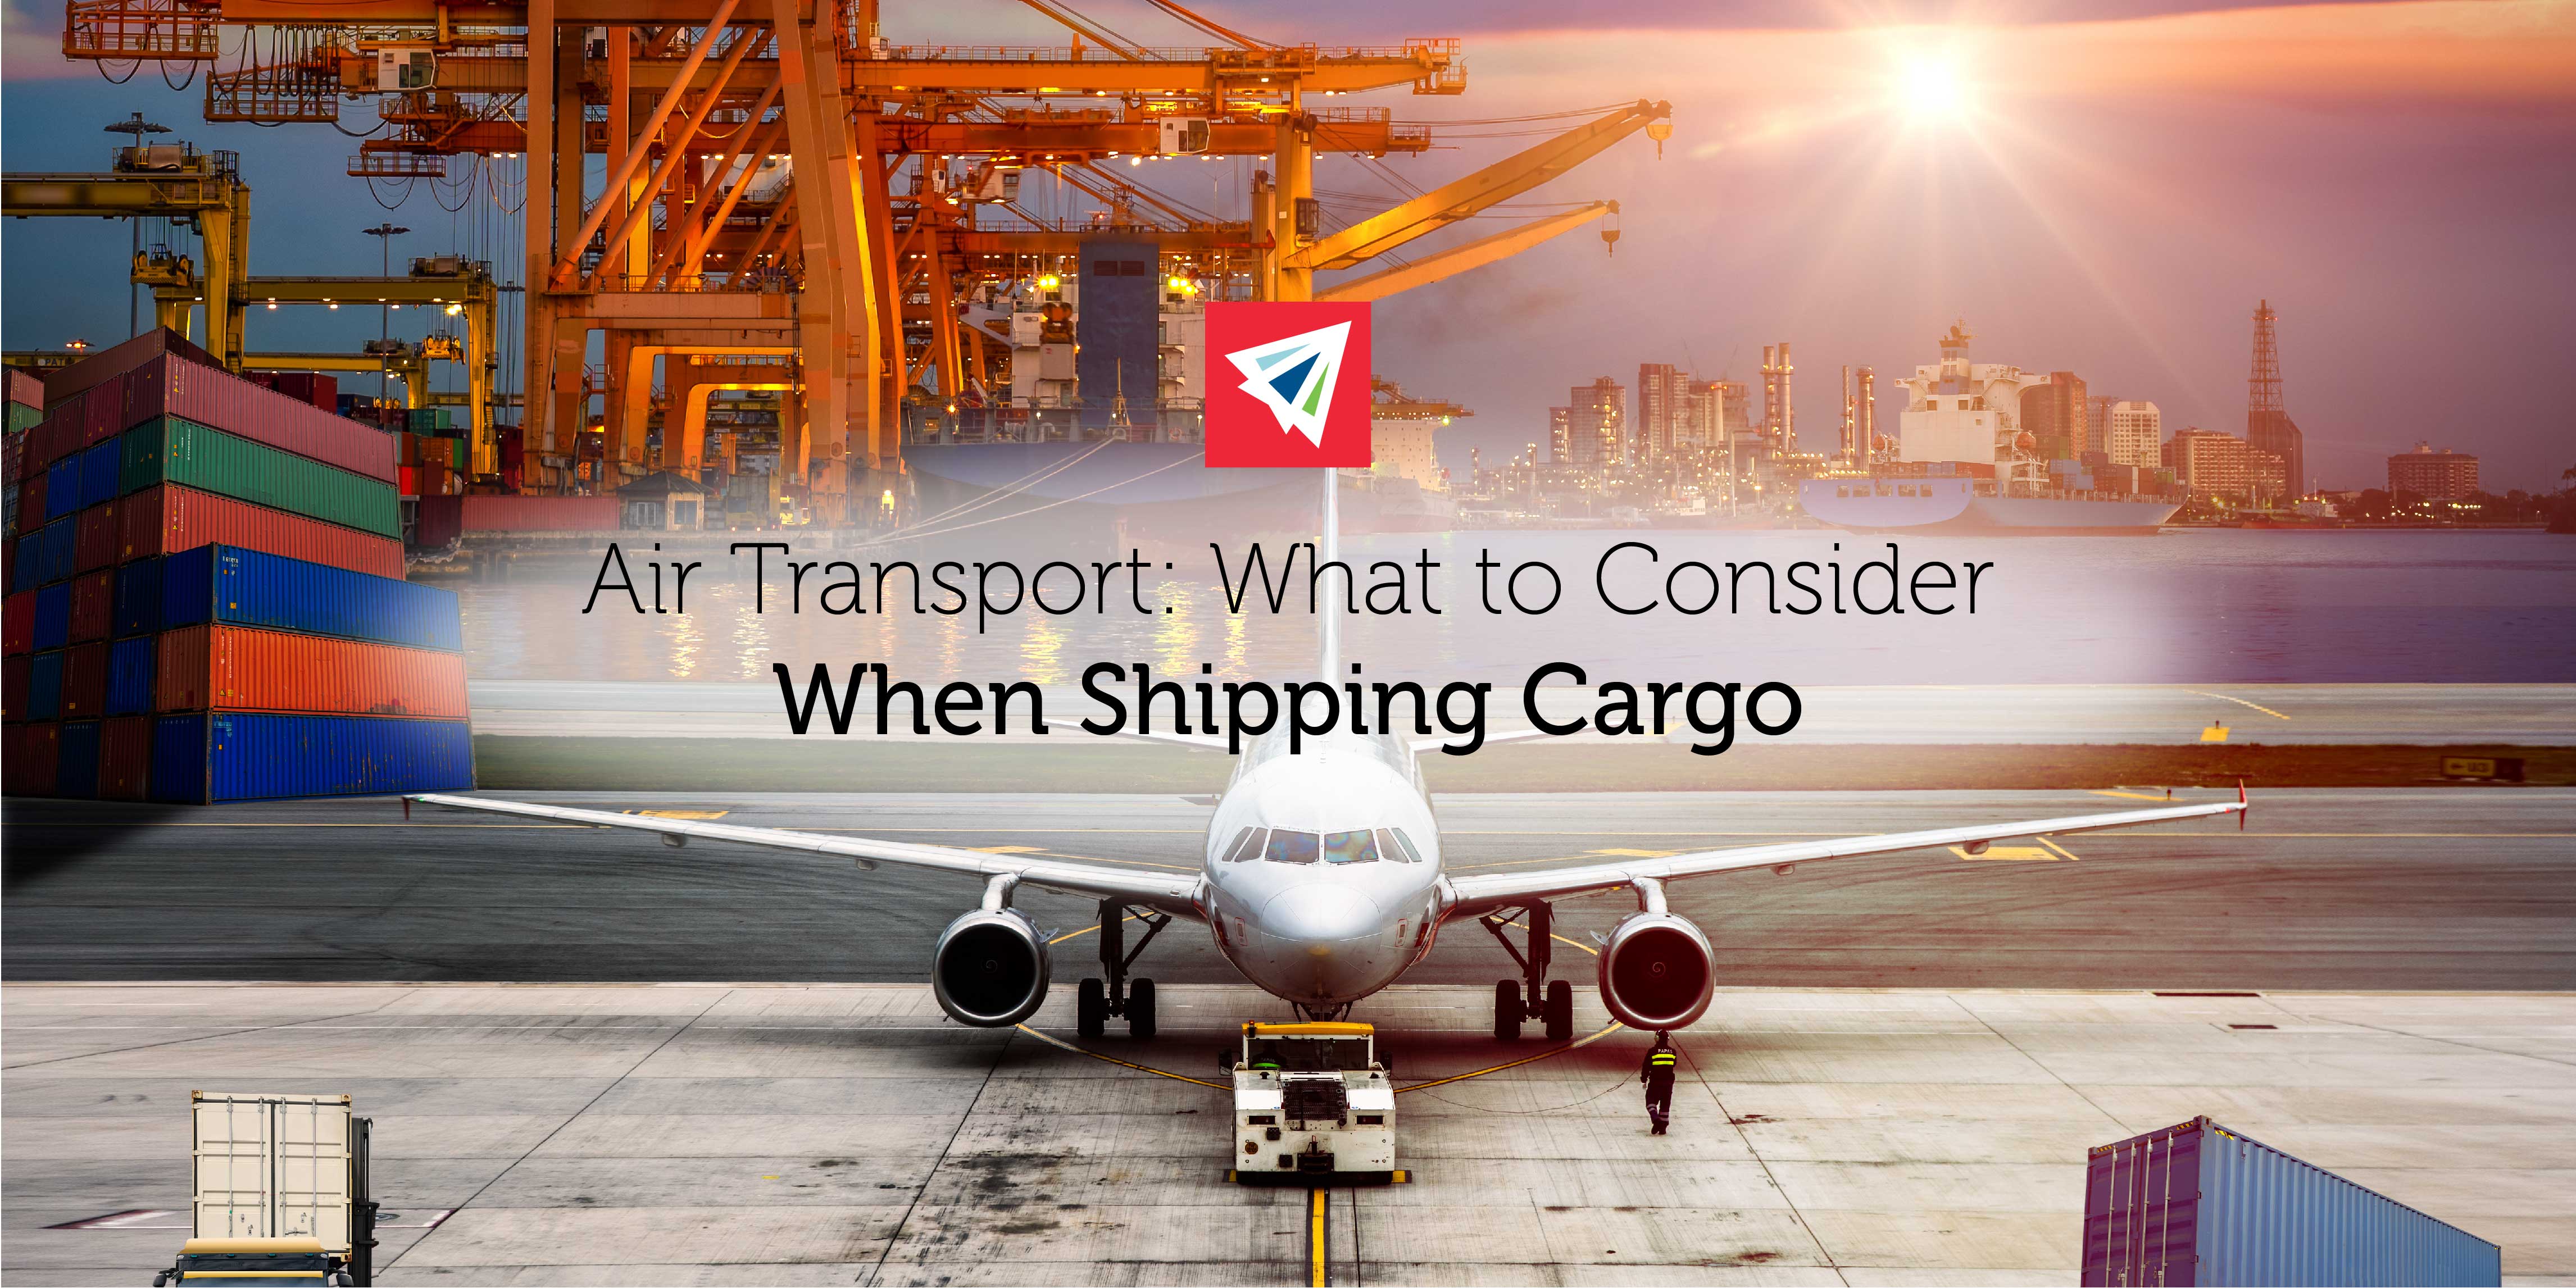 Air Transport - What to Consider When Shipping Cargo